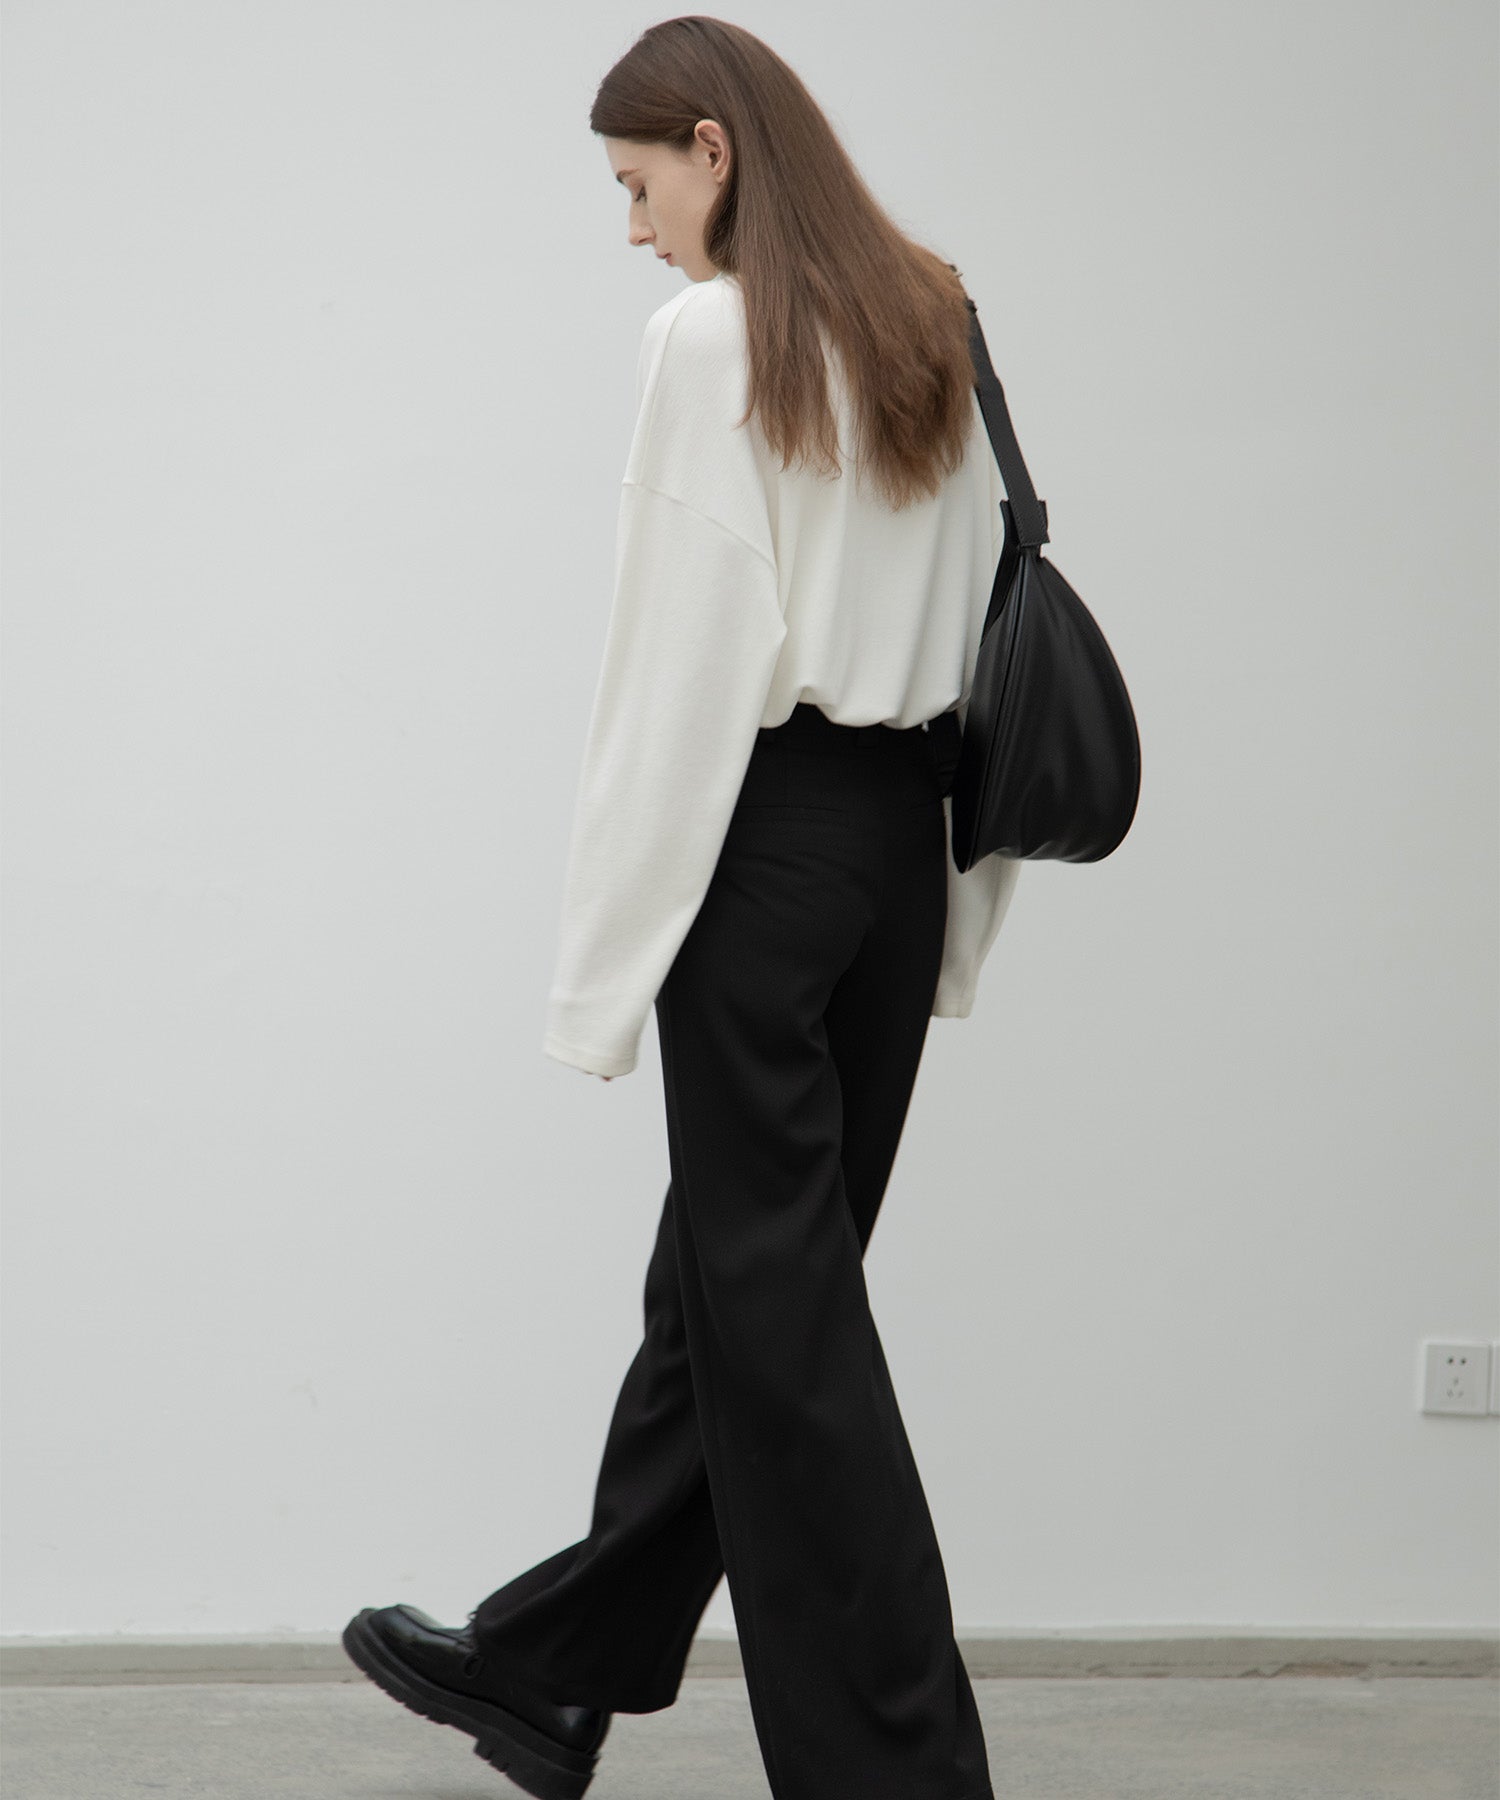 Center press stack pants with elastic sides 